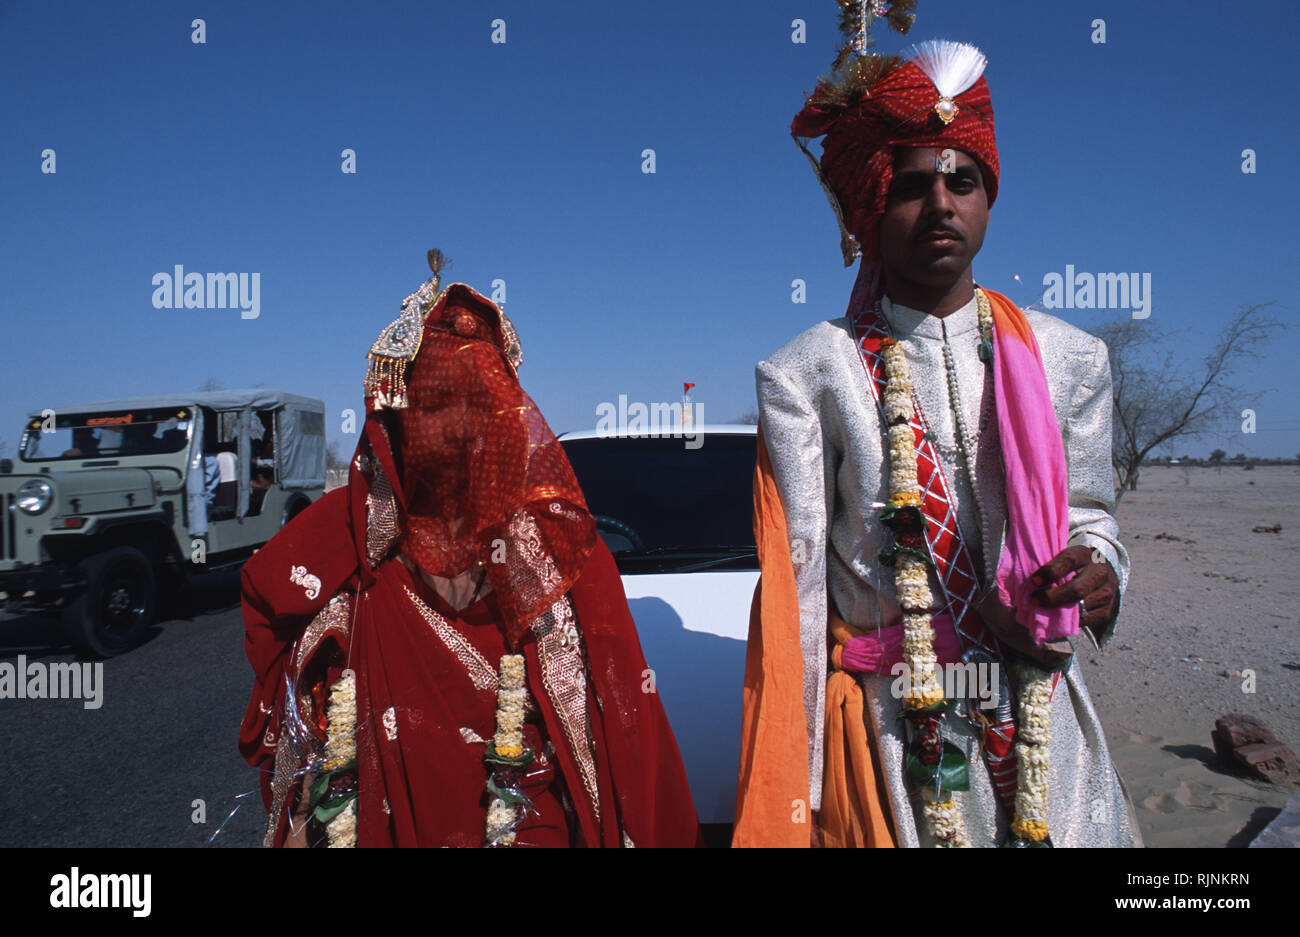 Caption: Bikaner, Rajasthan, India - Apr 2003. A rajasthani couple after their wedding ceremony conducted on the edge of a higheay near Bikaner, weste Stock Photo